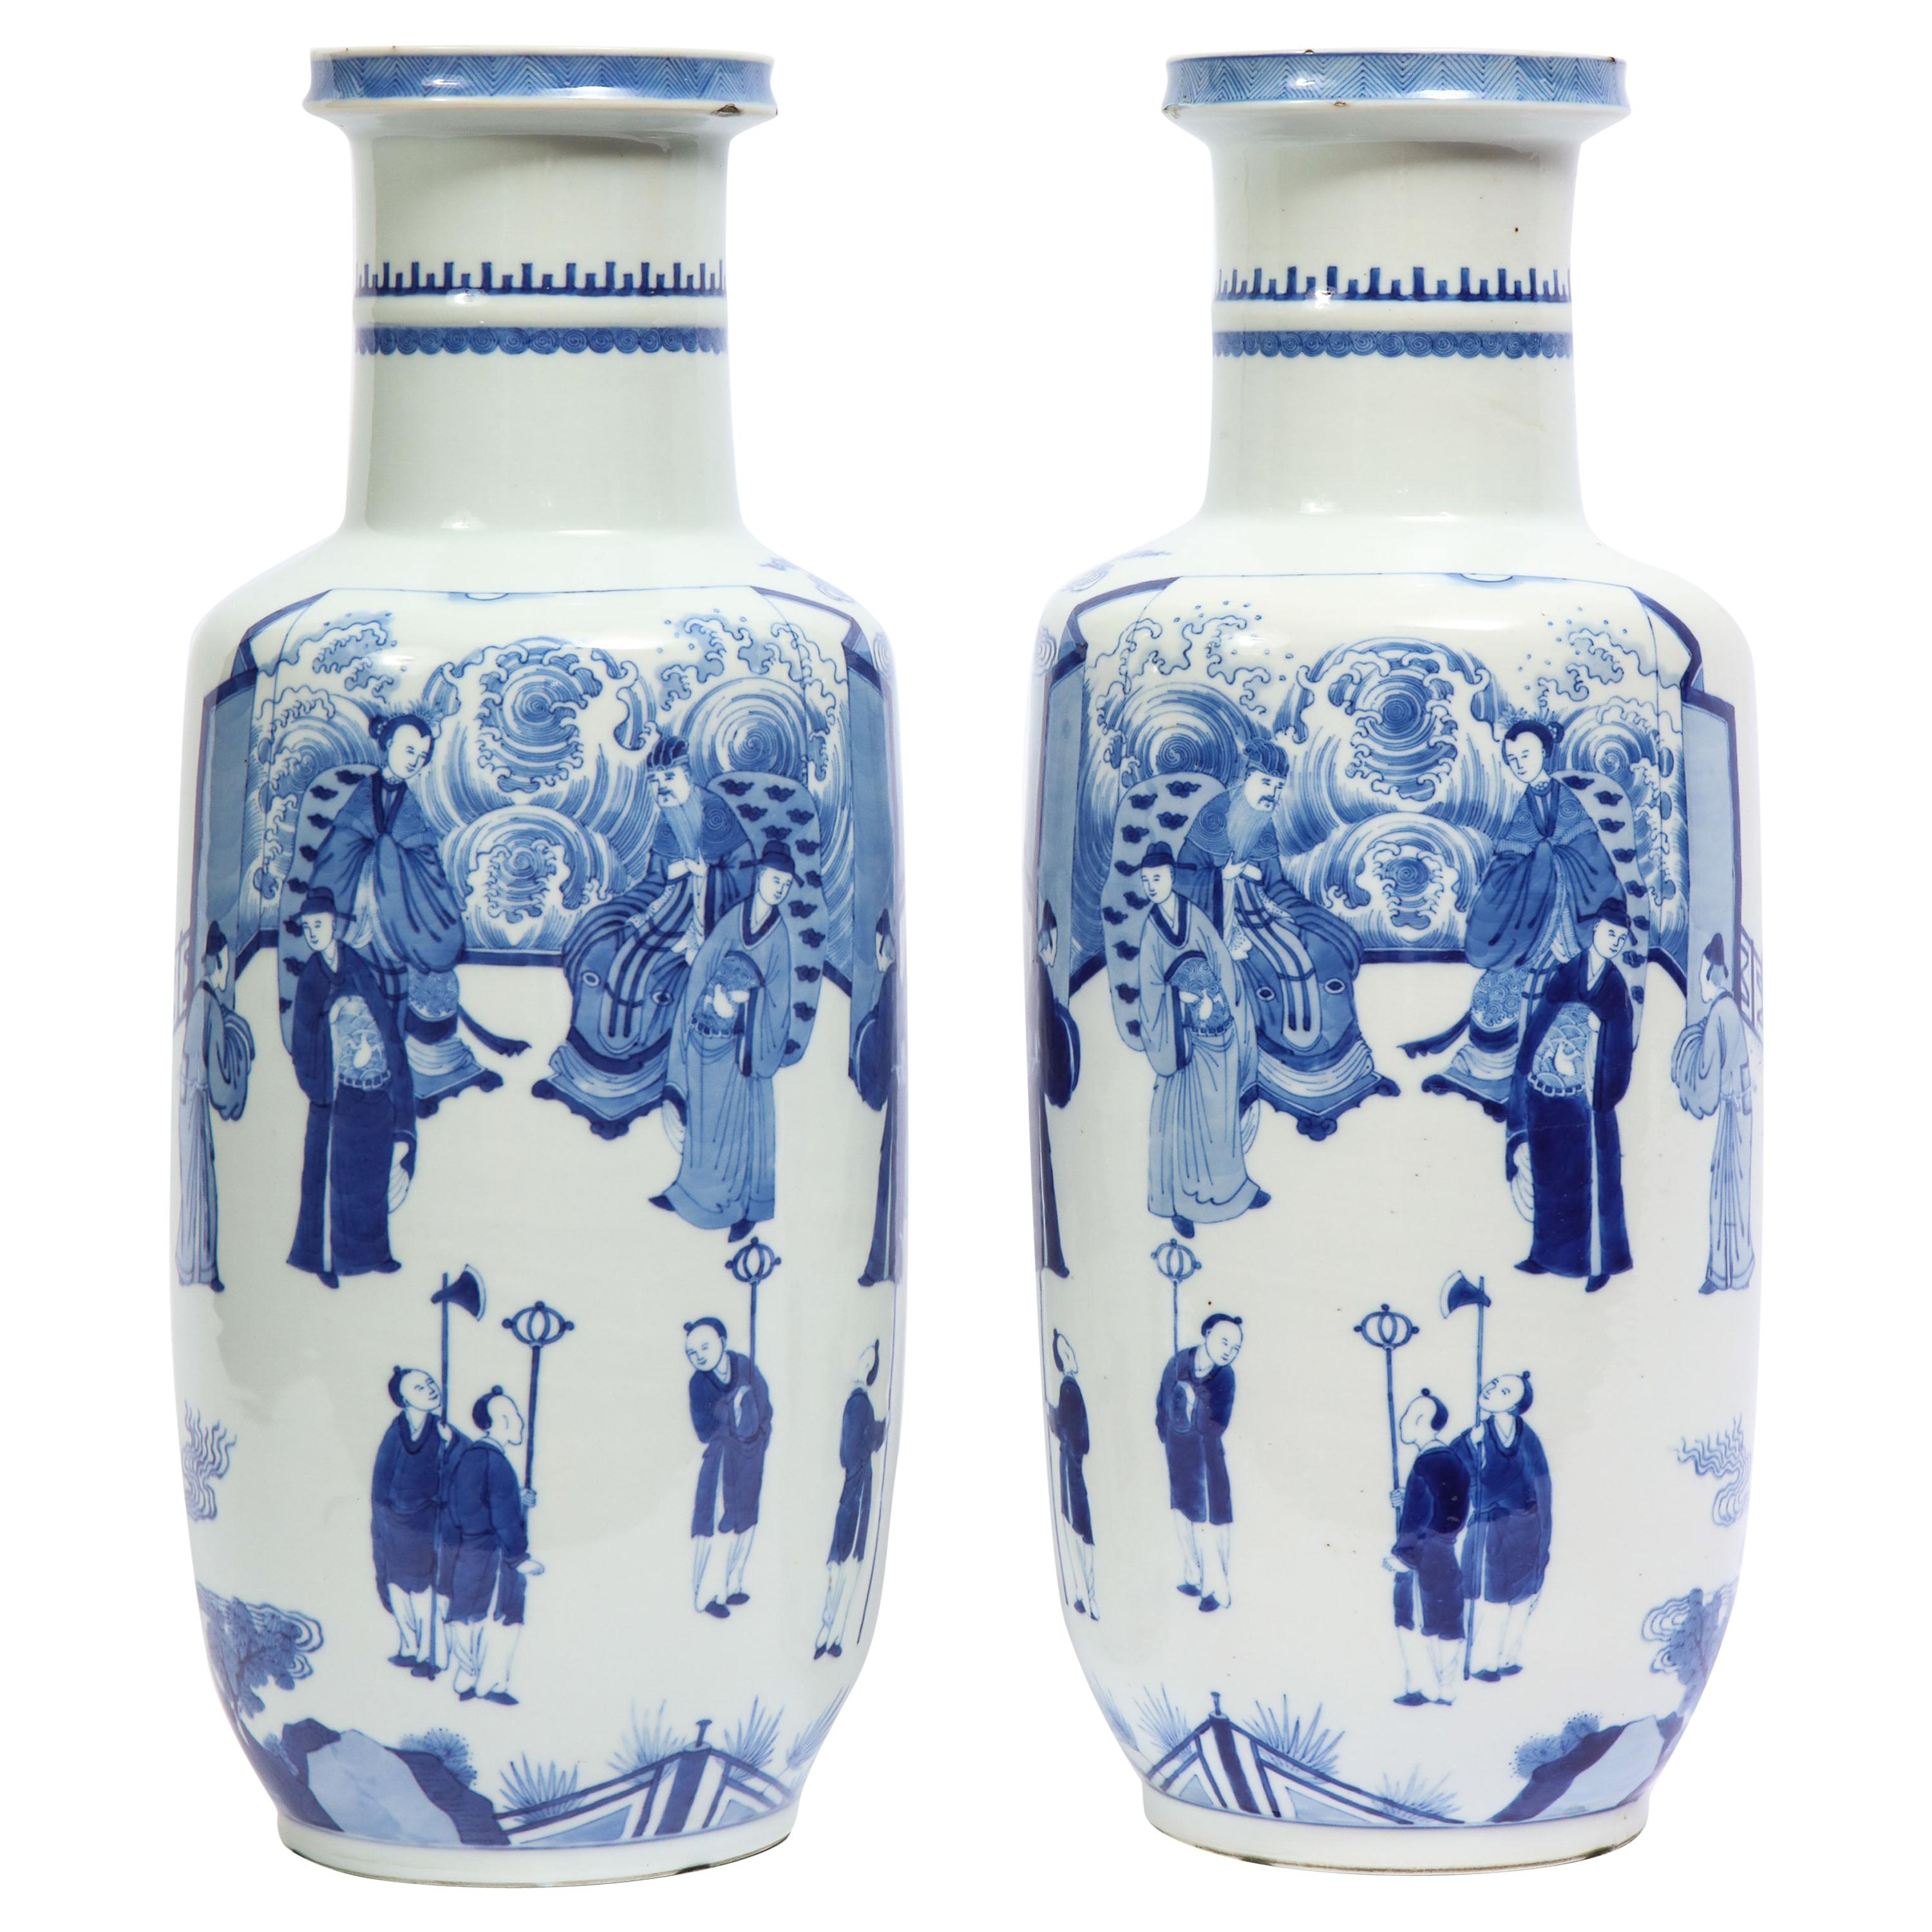 19th Century Blue & White Chinese Porcelain Bangchui Ping Form Vases, Pair